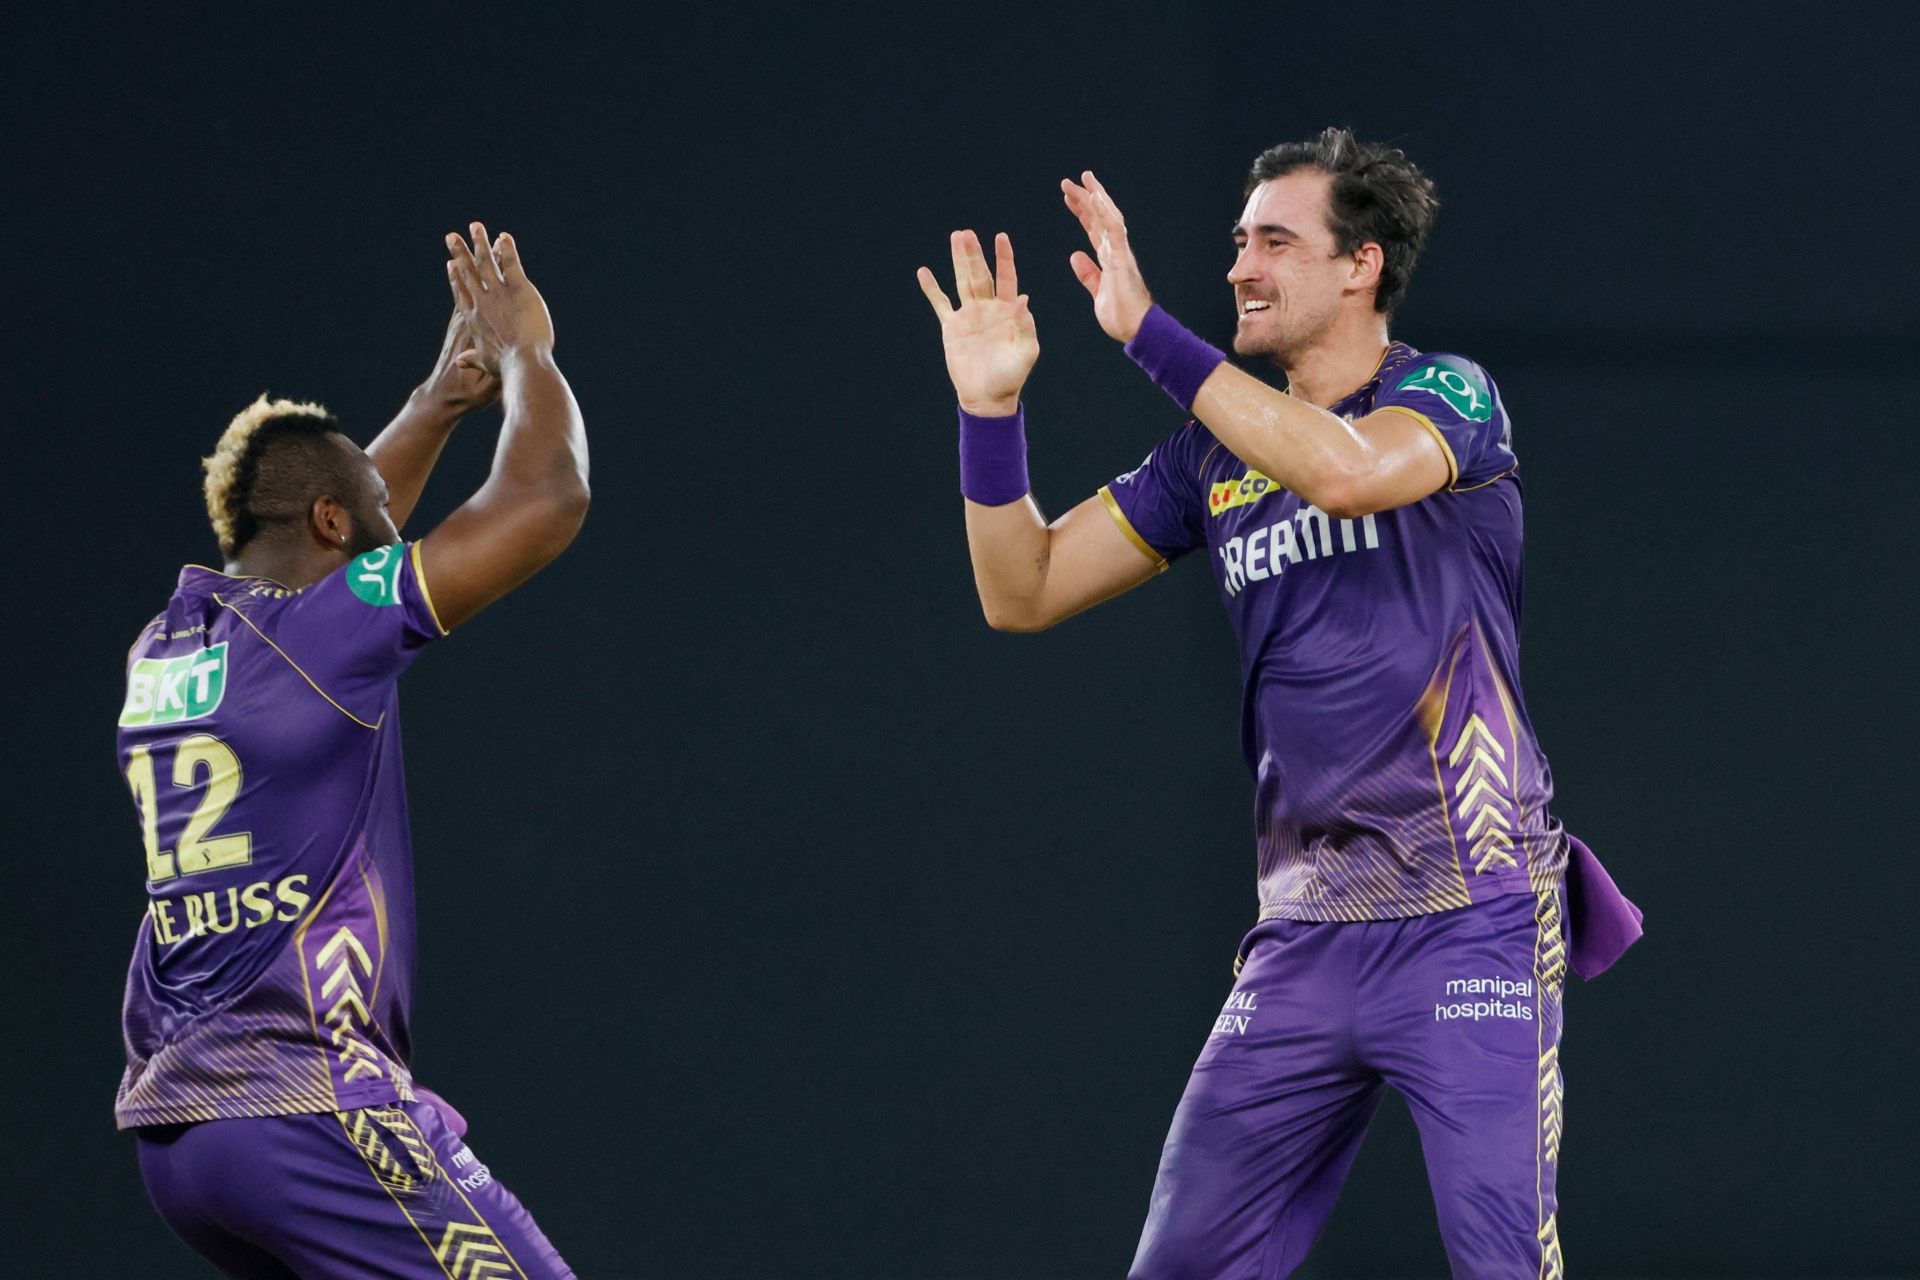 Mitchell Starc and Andre Russell celebrate a wicket. (Credits: Twitter)